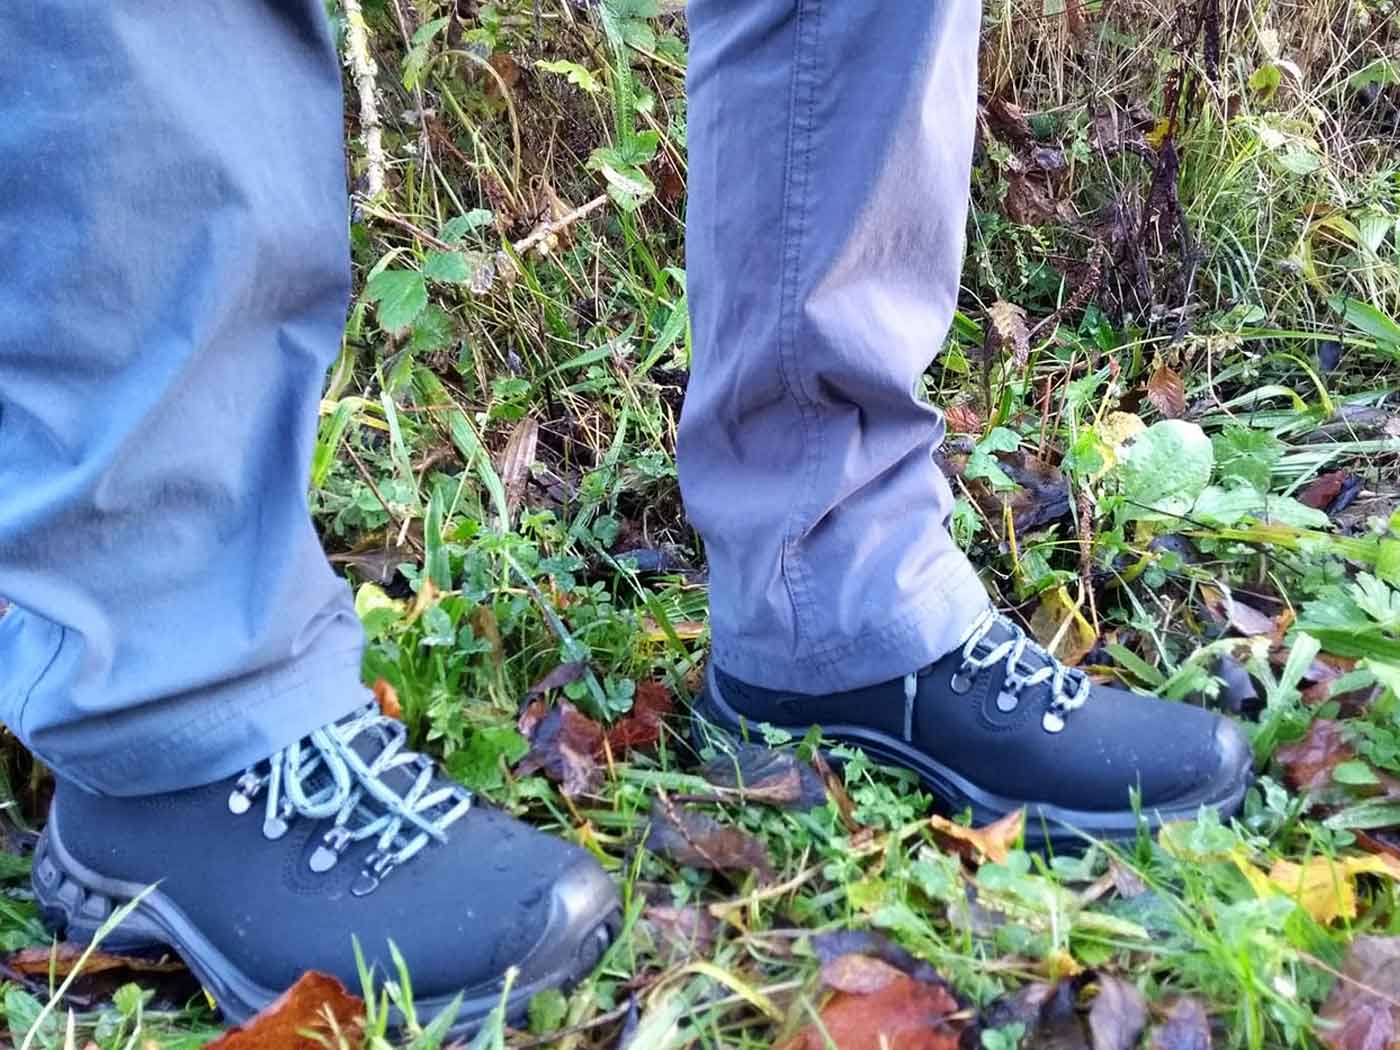 Will's Vegan Shoes Hiking Boot Review 